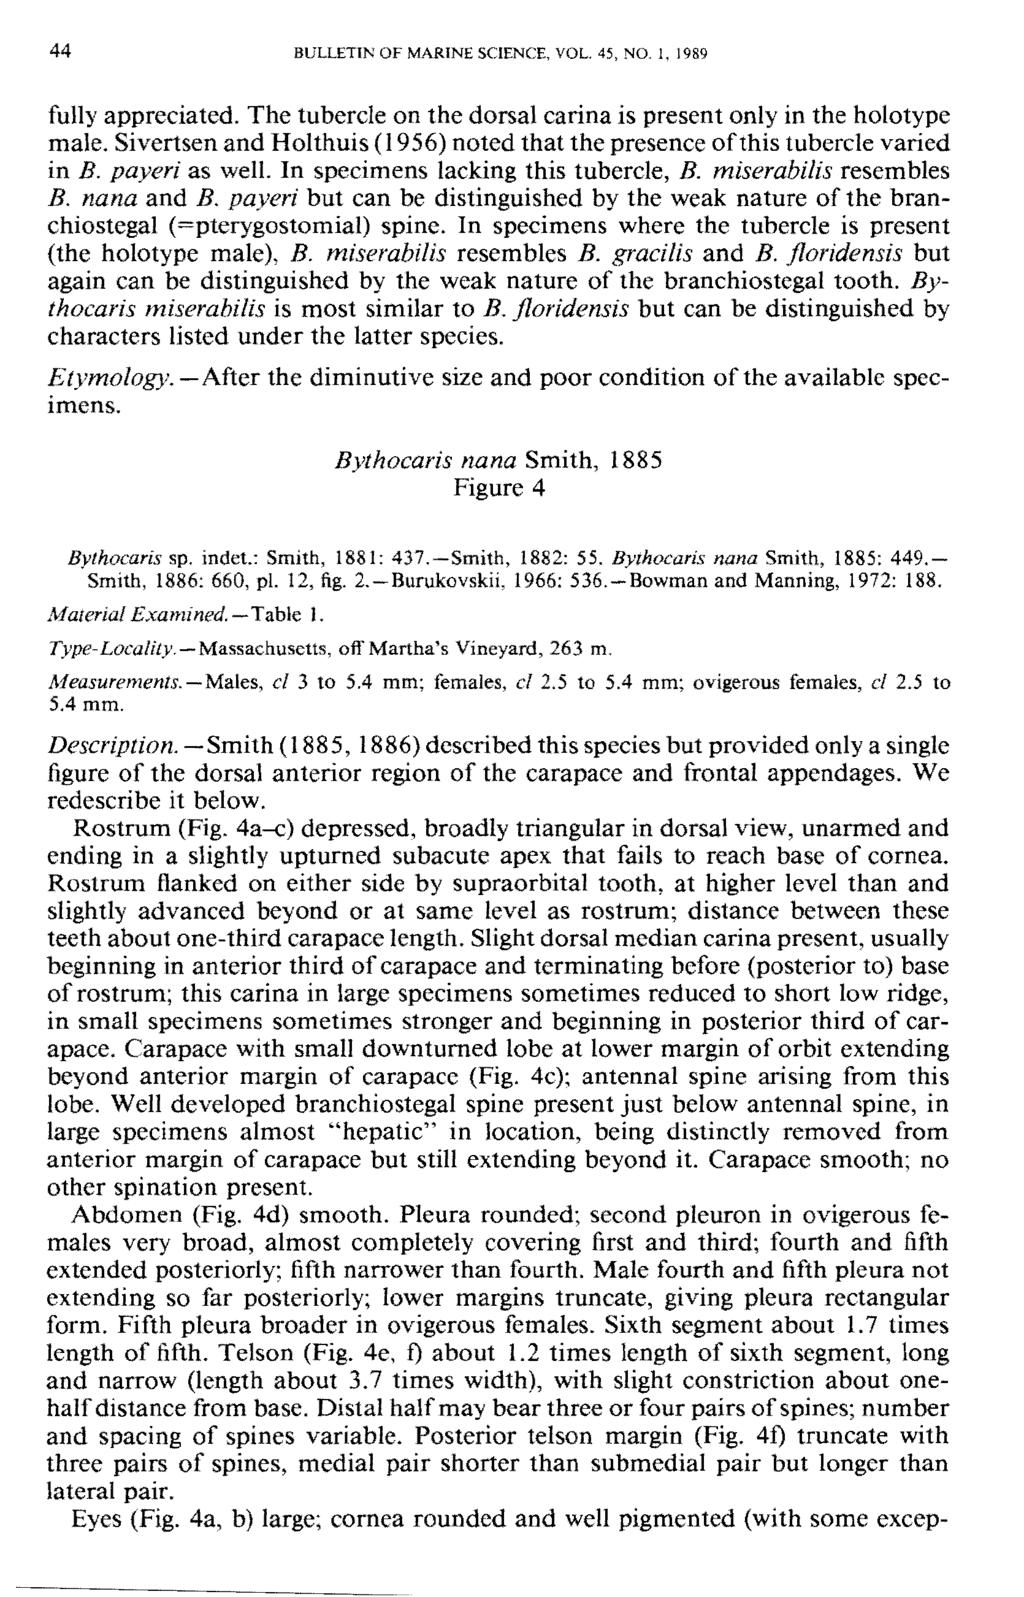 44 BULLETIN OF MARINE SCIENCE, VOL. 45. NO. 1, 1989 fully appreciated. The tubercle on the dorsal carina is present only in the holotype male.